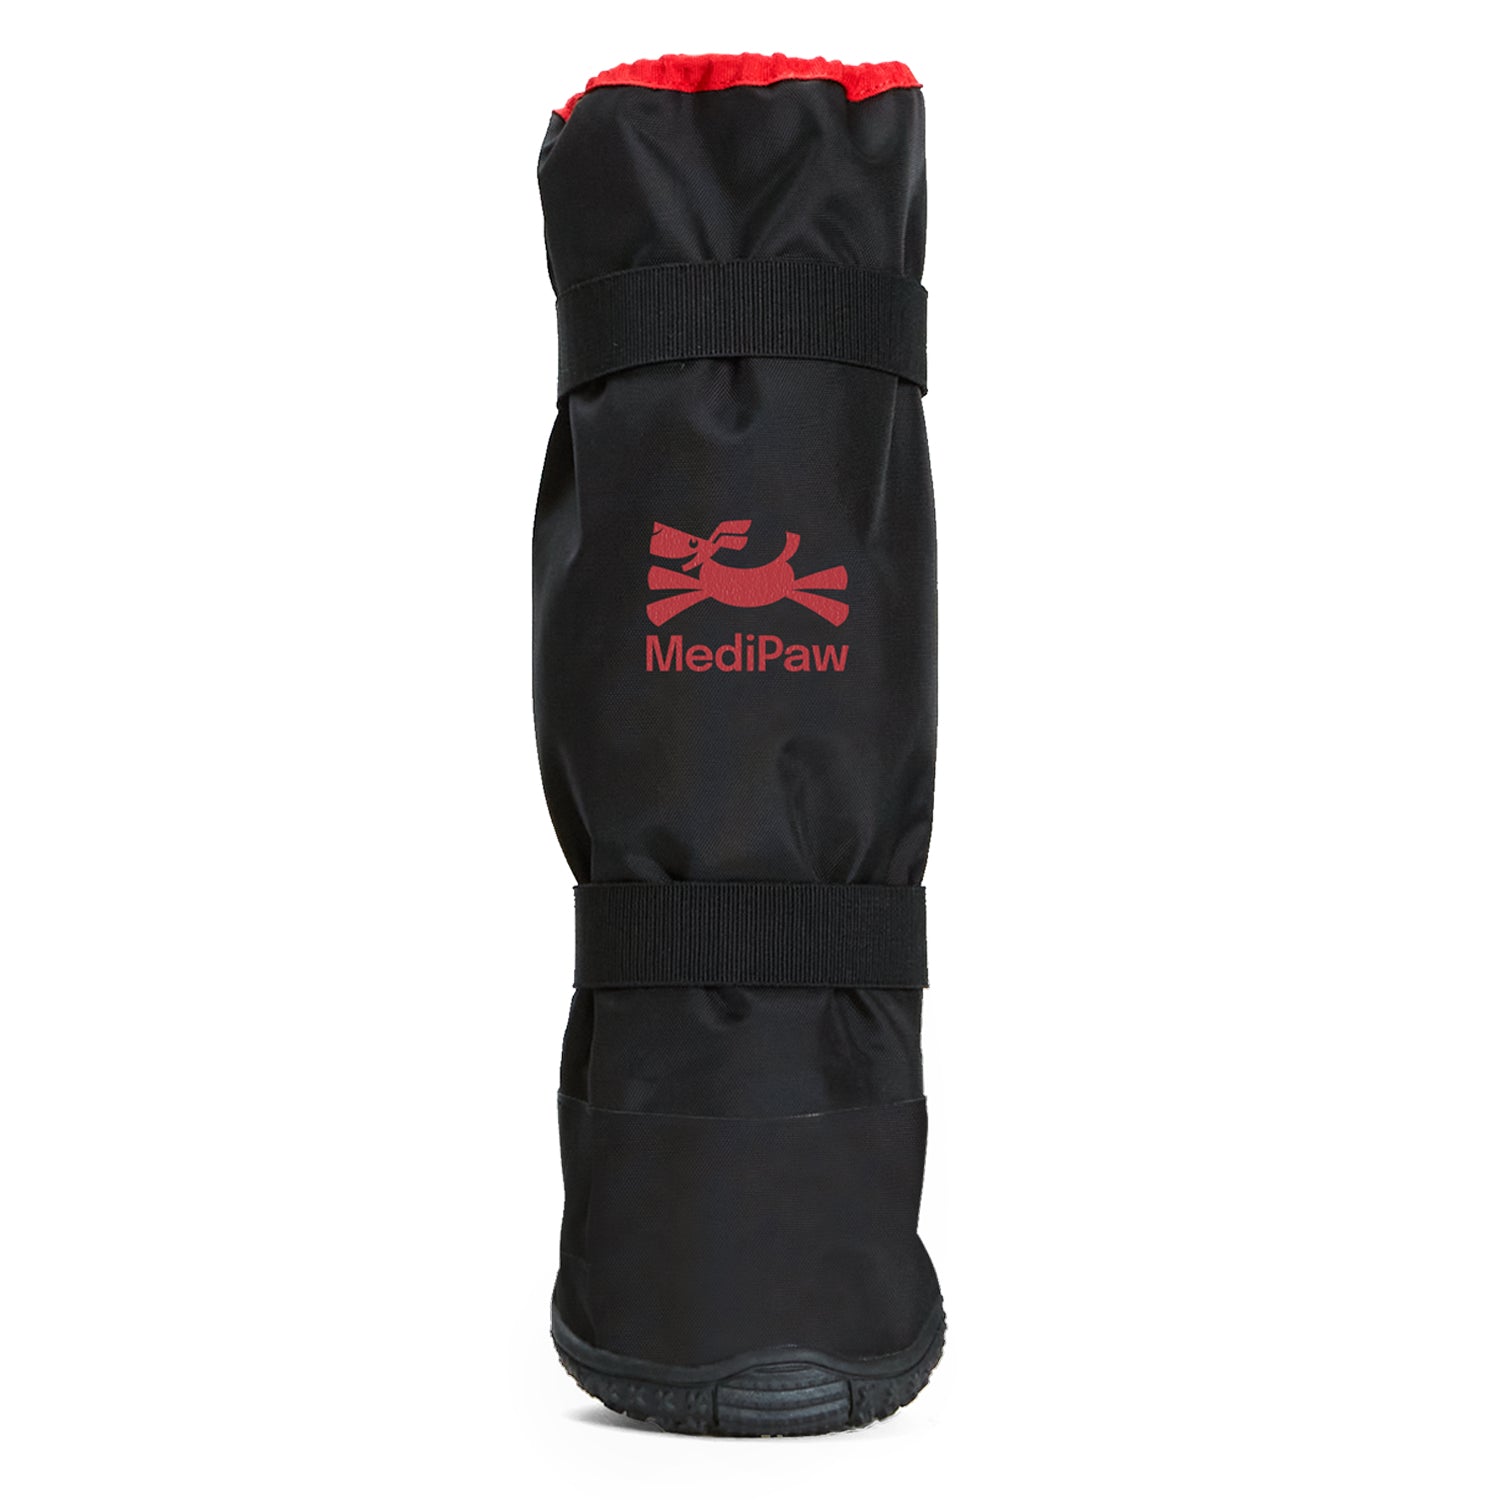 A black and red dog boot with the Your Whole Dog logo on it, perfect for protecting your furry friend's paws during walks or hikes. This durable and stylish boot is part of the MediPaw: Rugged X-Boot.